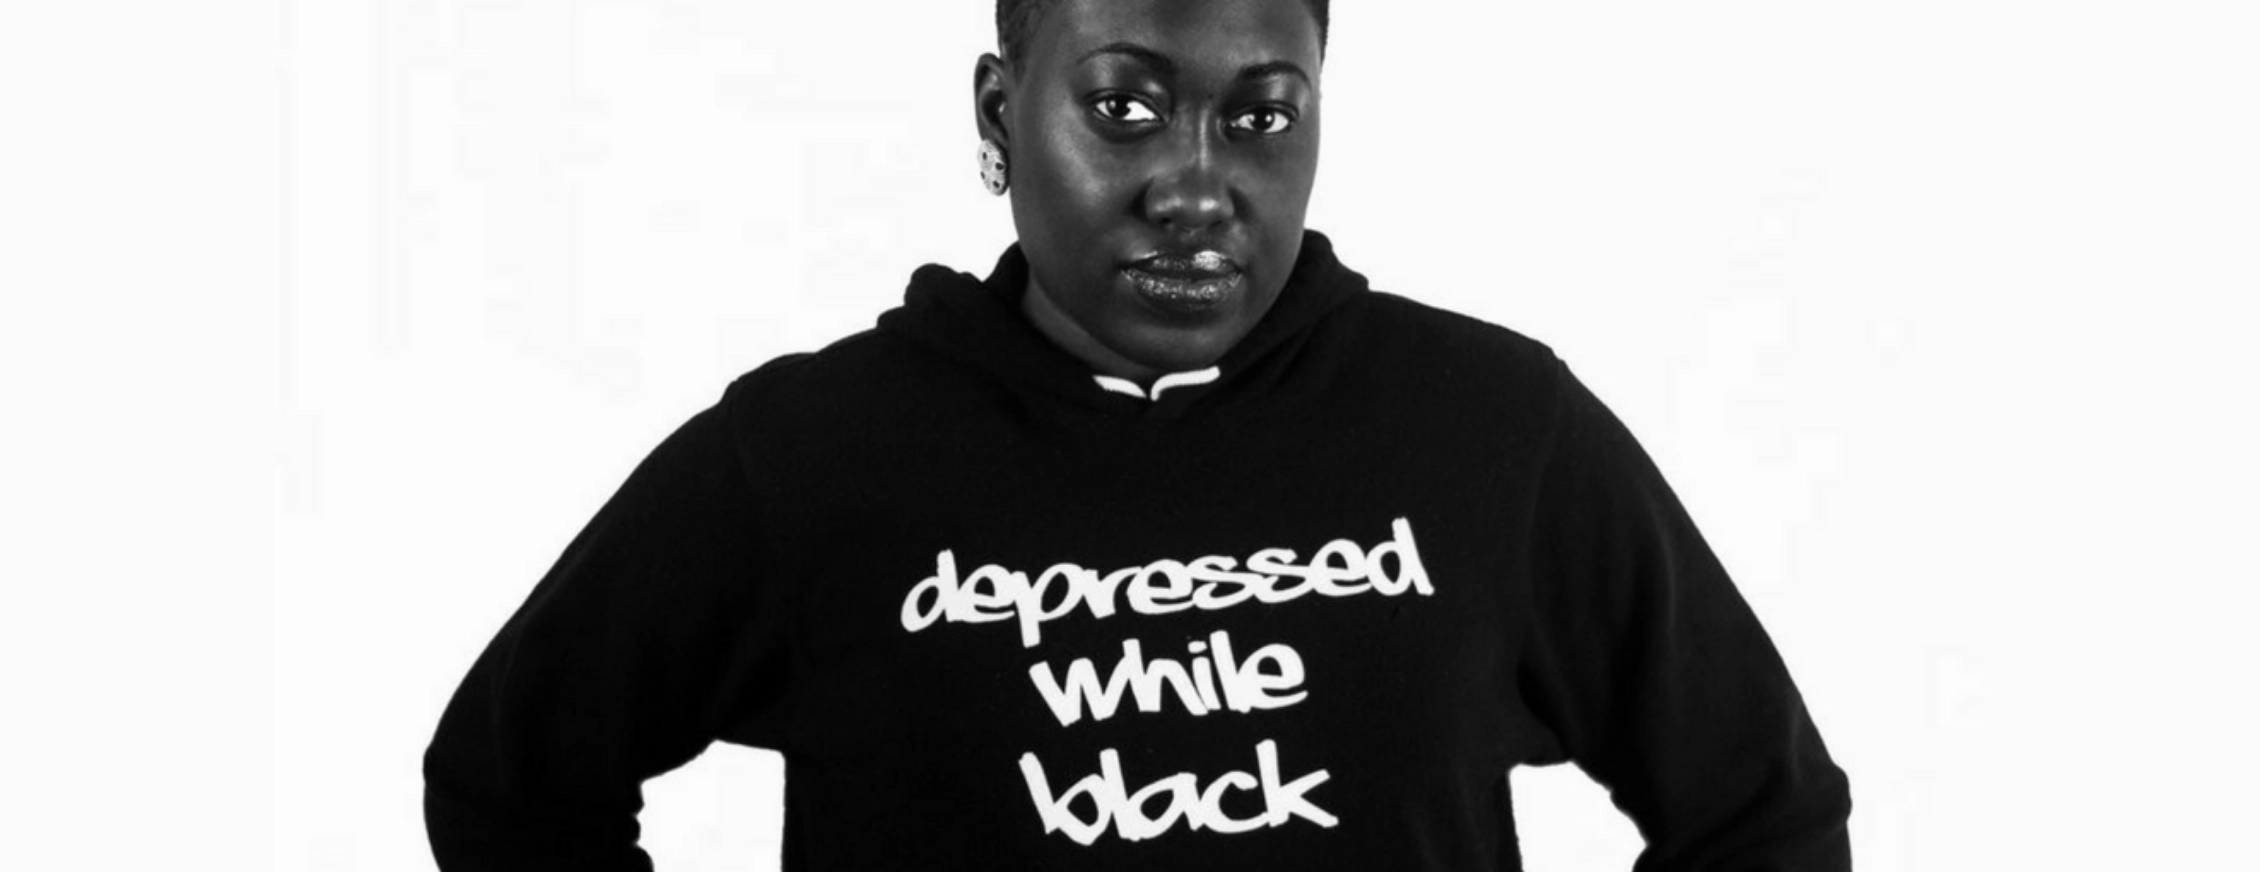 Imadé Nibokun (she/her), an individual living with depression wearing a hoodie with the words "depressed while black"